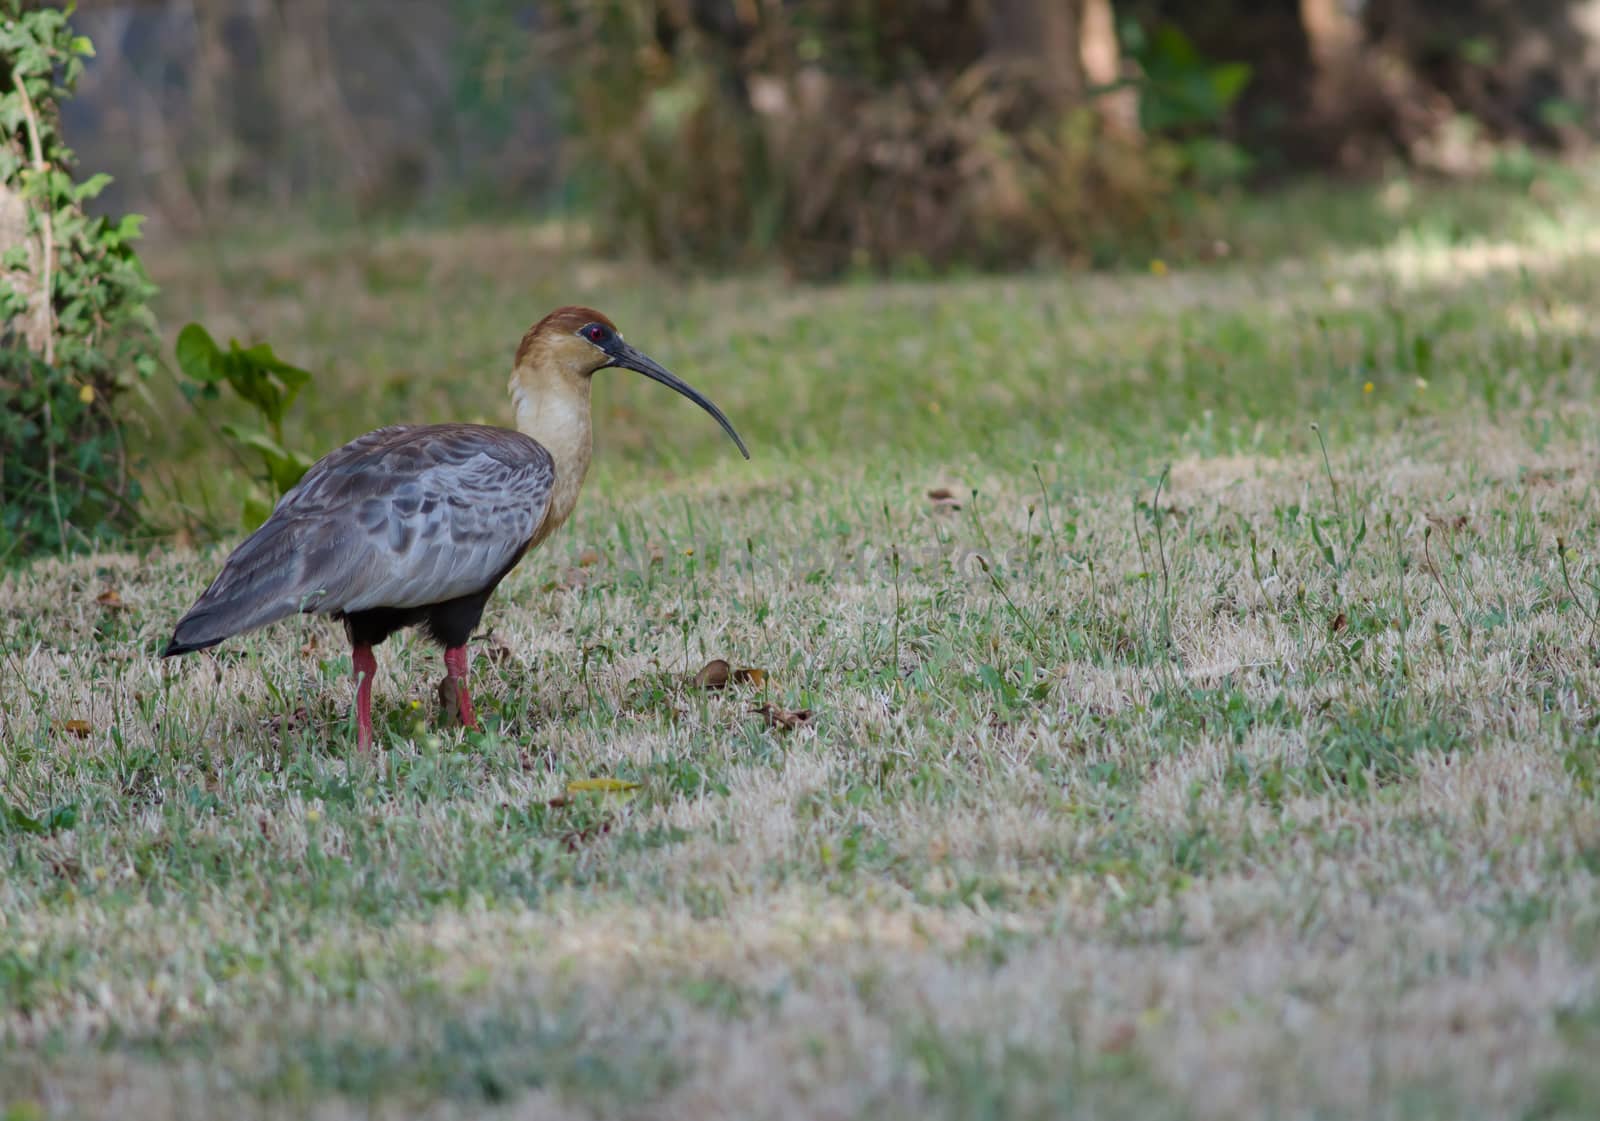 Black-faced ibis Theristicus melanopis in a meadow. by VictorSuarez